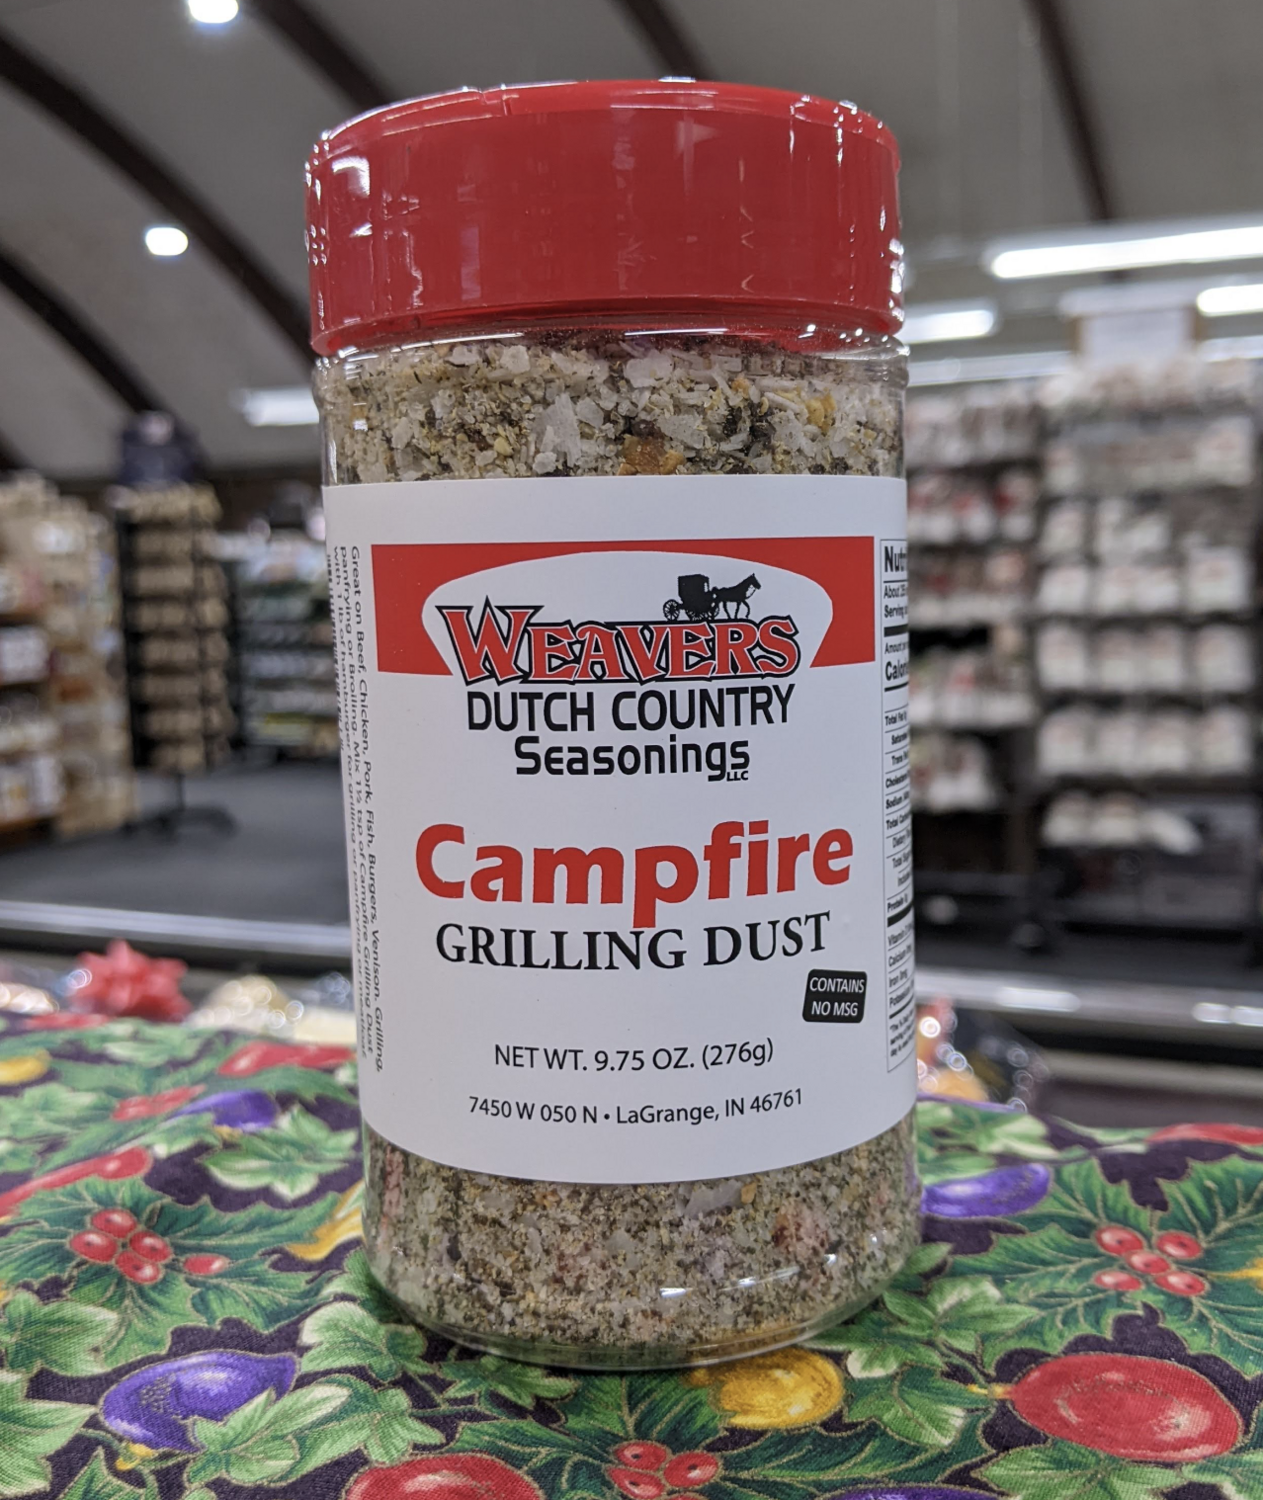 Campfire Grilling Dust